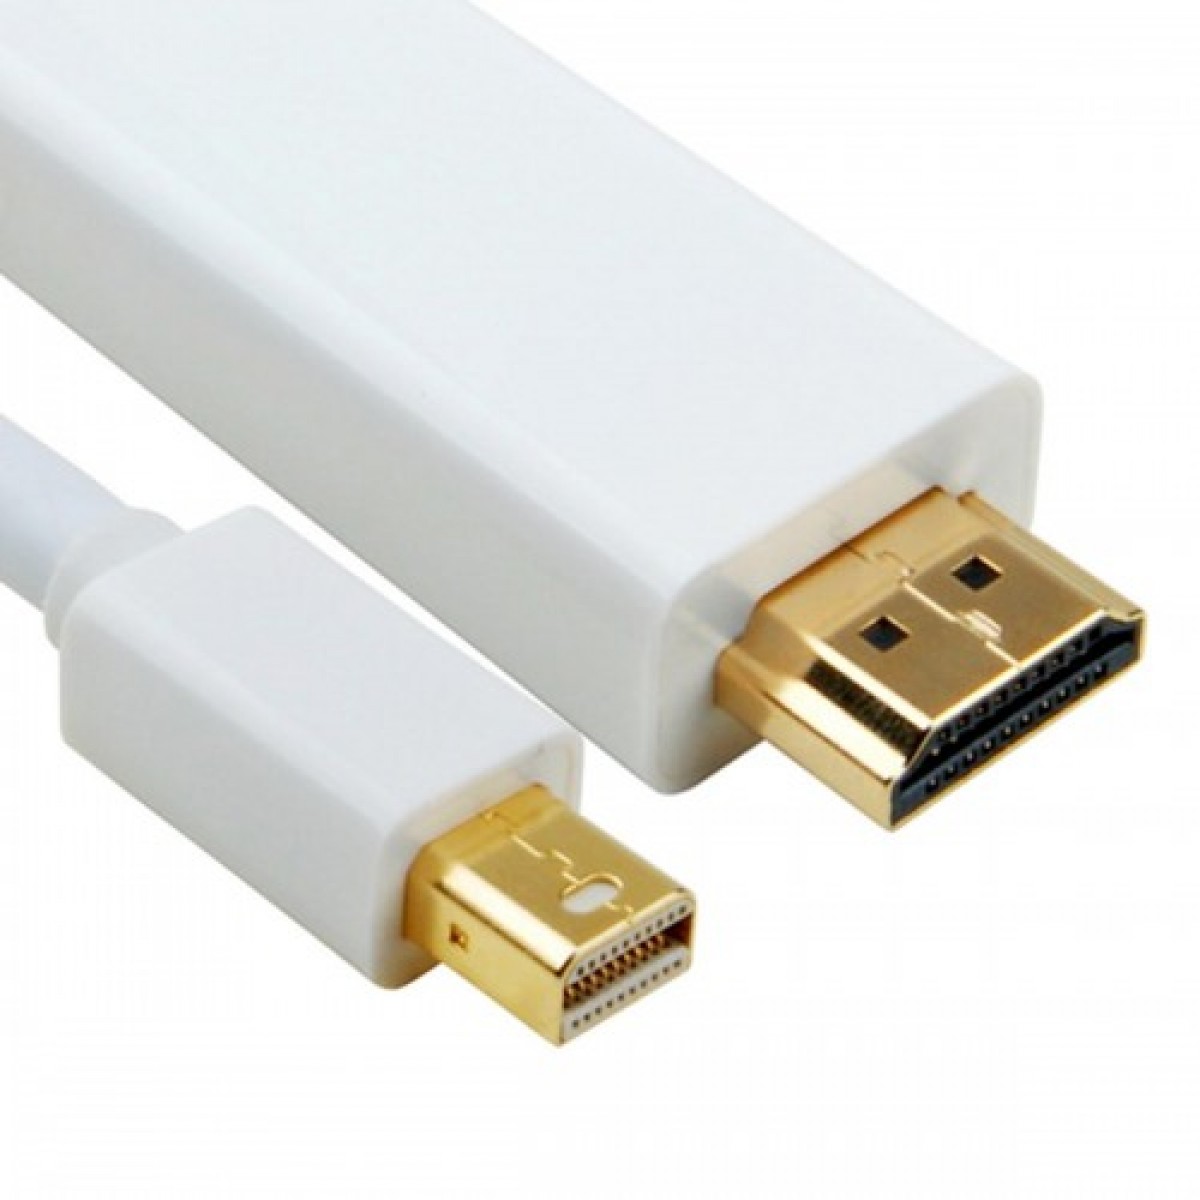 White Male Thunderbolt Mini Display to Male HDMI Cable for Apple Thunderbolt to FireWire Adapter | Keple.com